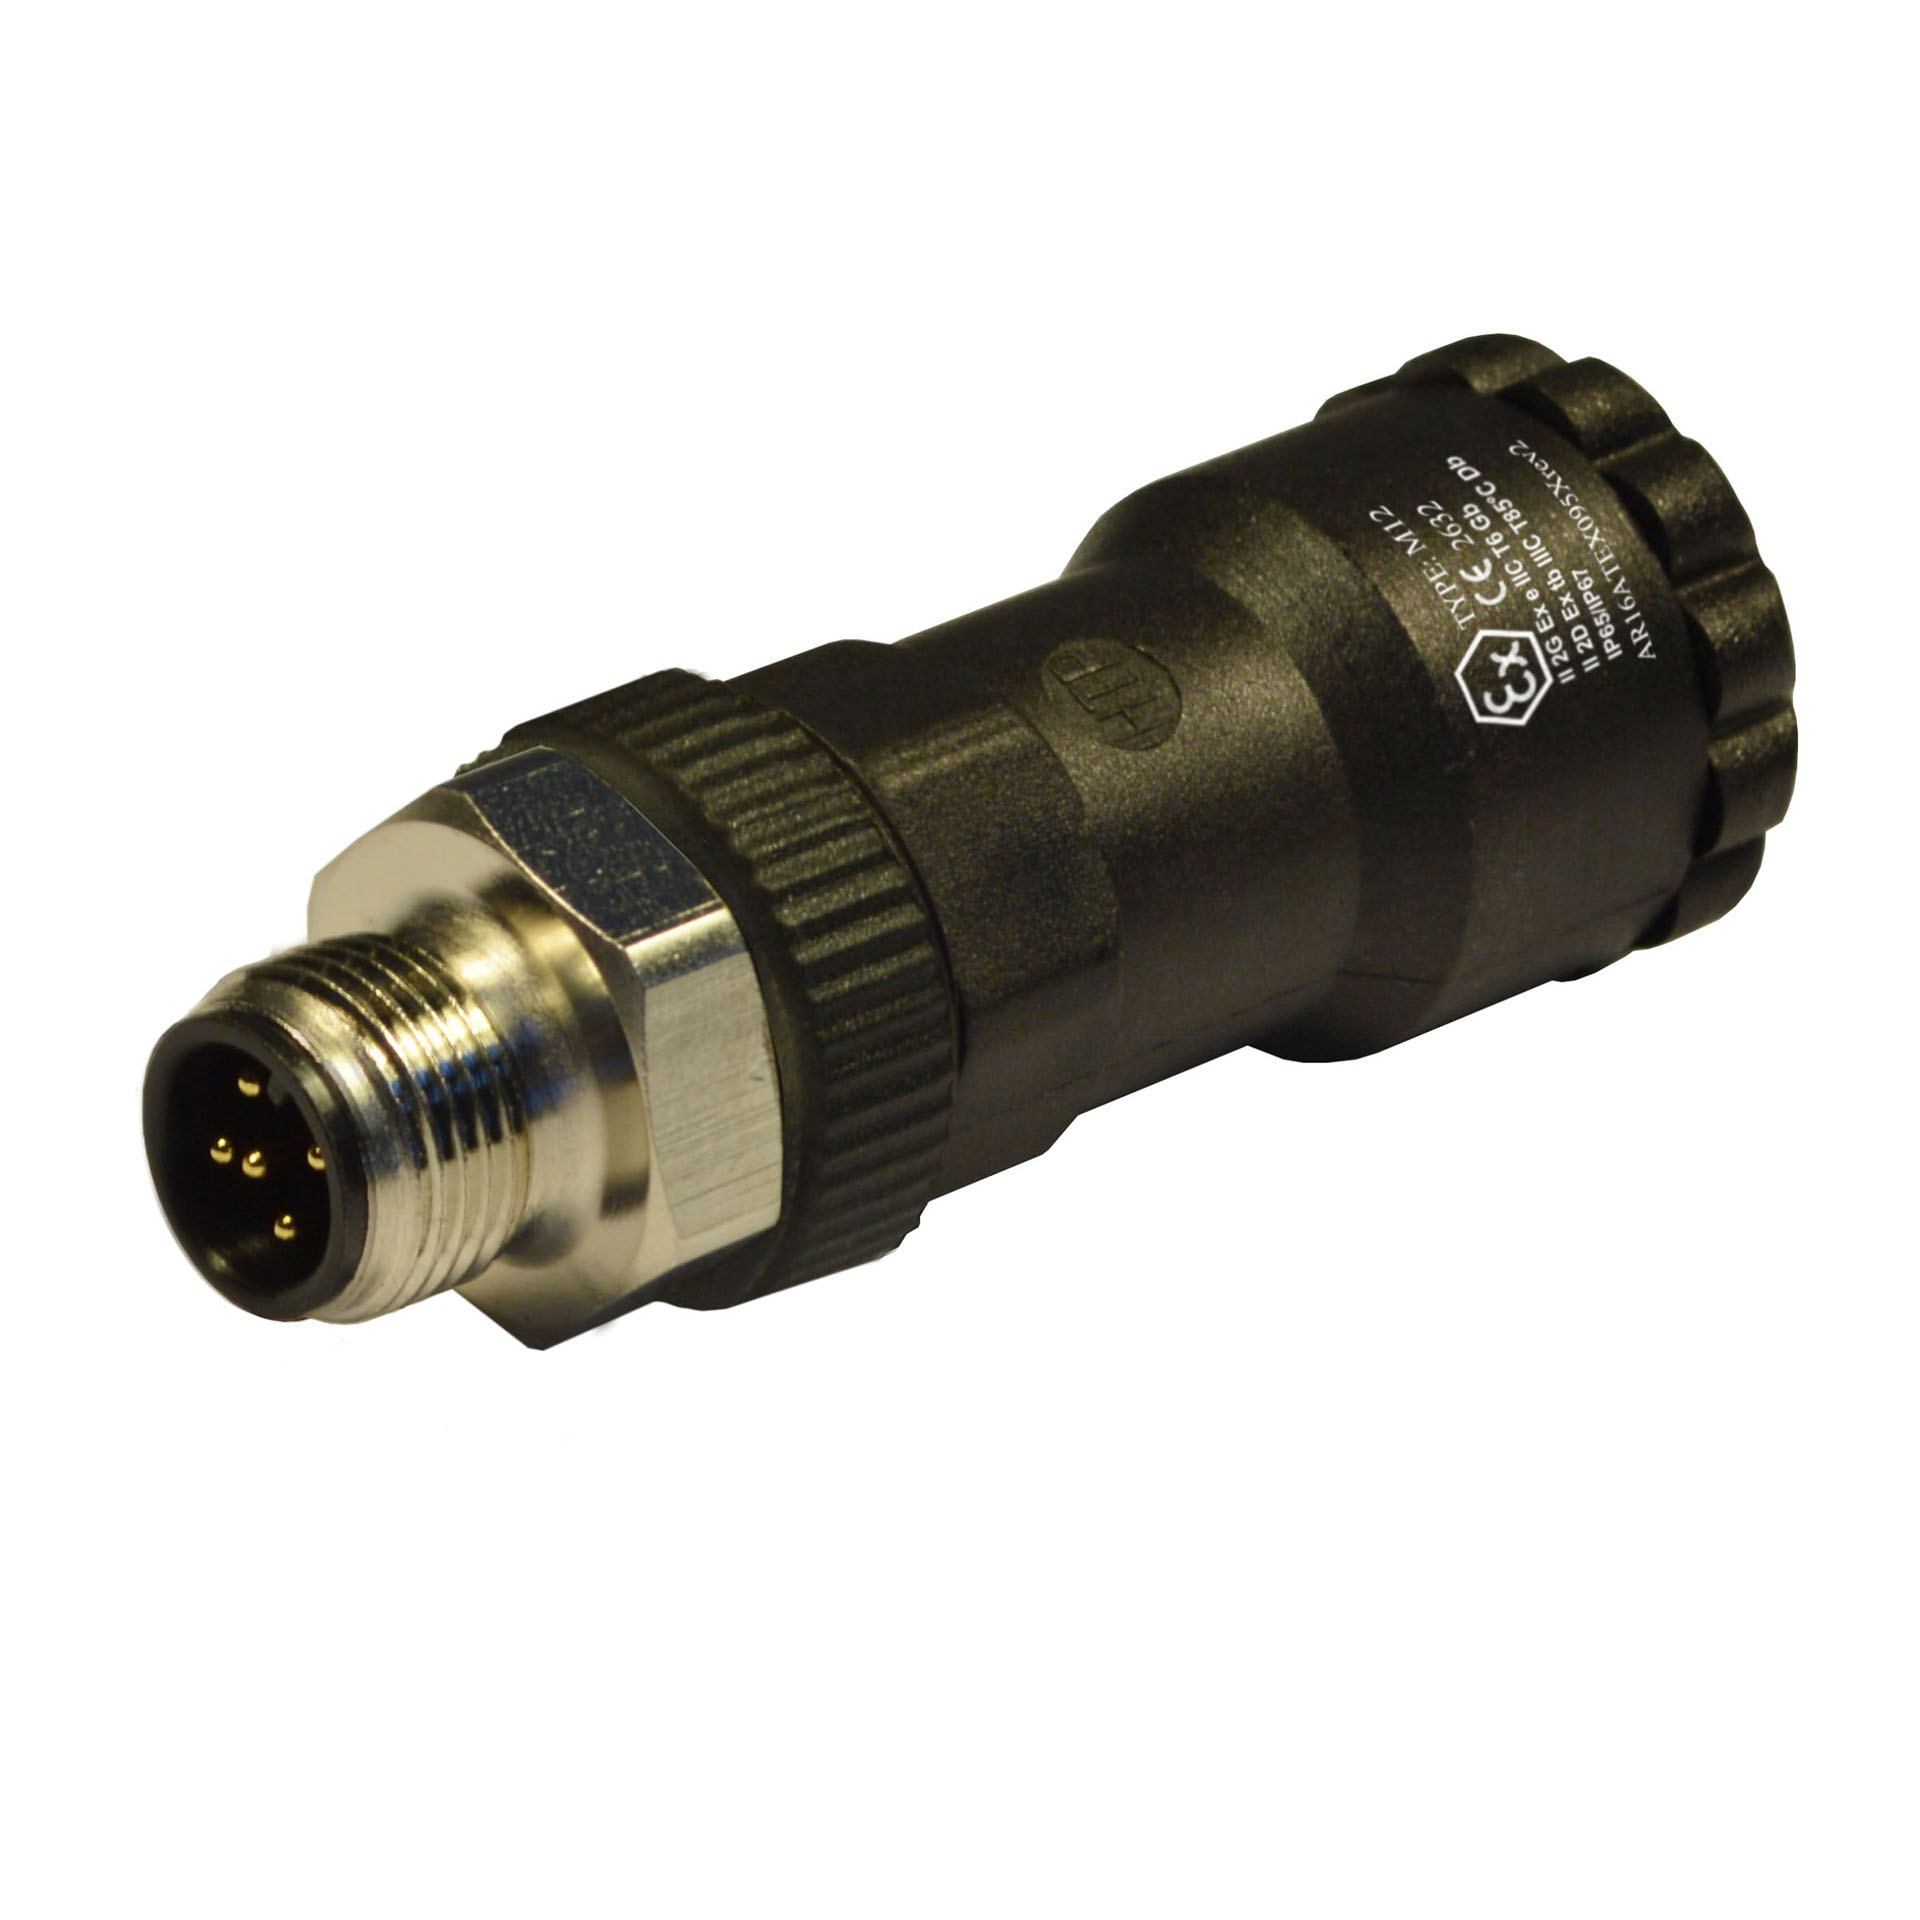 M12 field attachable,male,180°,5p.,PG9/11unif.or double exit cable,ATEX conform